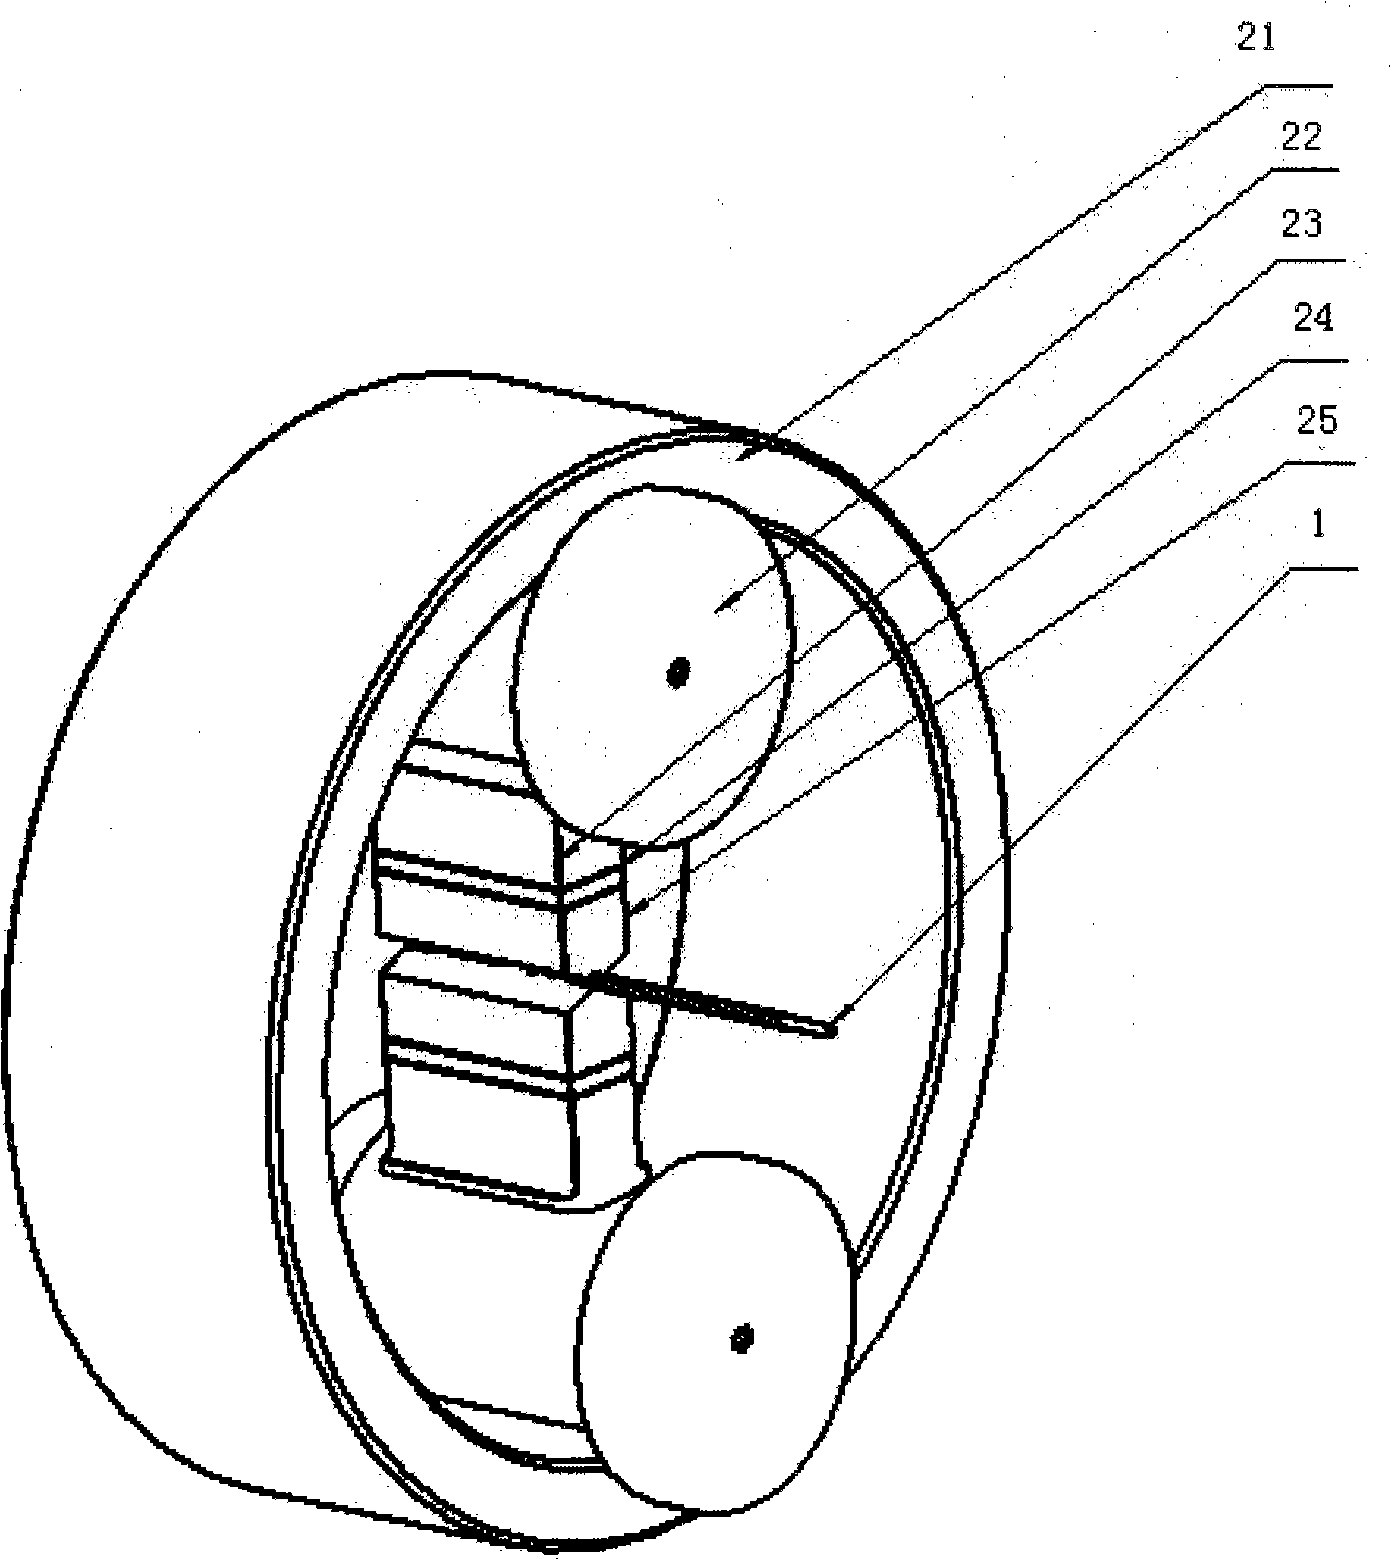 Method for making wire cable packaged with flat yarn in appearance